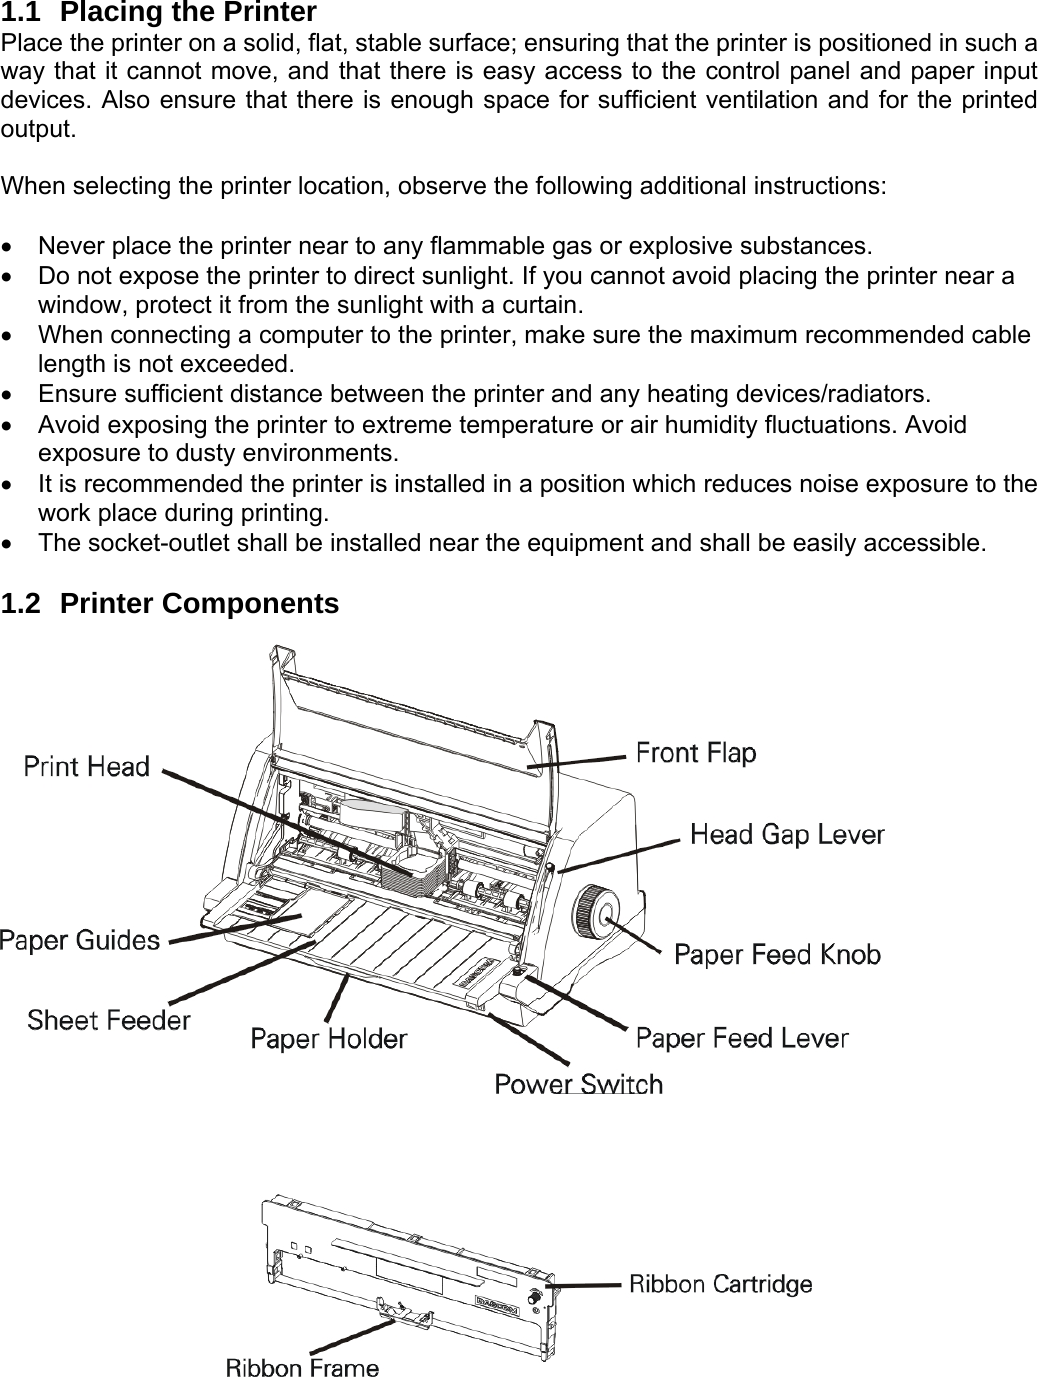     1.1  Placing the Printer Place the printer on a solid, flat, stable surface; ensuring that the printer is positioned in such a way that it cannot move, and that there is easy access to the control panel and paper input devices. Also ensure that there is enough space for sufficient ventilation and for the printed output.  When selecting the printer location, observe the following additional instructions:  •  Never place the printer near to any flammable gas or explosive substances. •  Do not expose the printer to direct sunlight. If you cannot avoid placing the printer near a window, protect it from the sunlight with a curtain. •  When connecting a computer to the printer, make sure the maximum recommended cable length is not exceeded. •  Ensure sufficient distance between the printer and any heating devices/radiators. •  Avoid exposing the printer to extreme temperature or air humidity fluctuations. Avoid exposure to dusty environments. •  It is recommended the printer is installed in a position which reduces noise exposure to the work place during printing.   •  The socket-outlet shall be installed near the equipment and shall be easily accessible.    1.2 Printer Components           